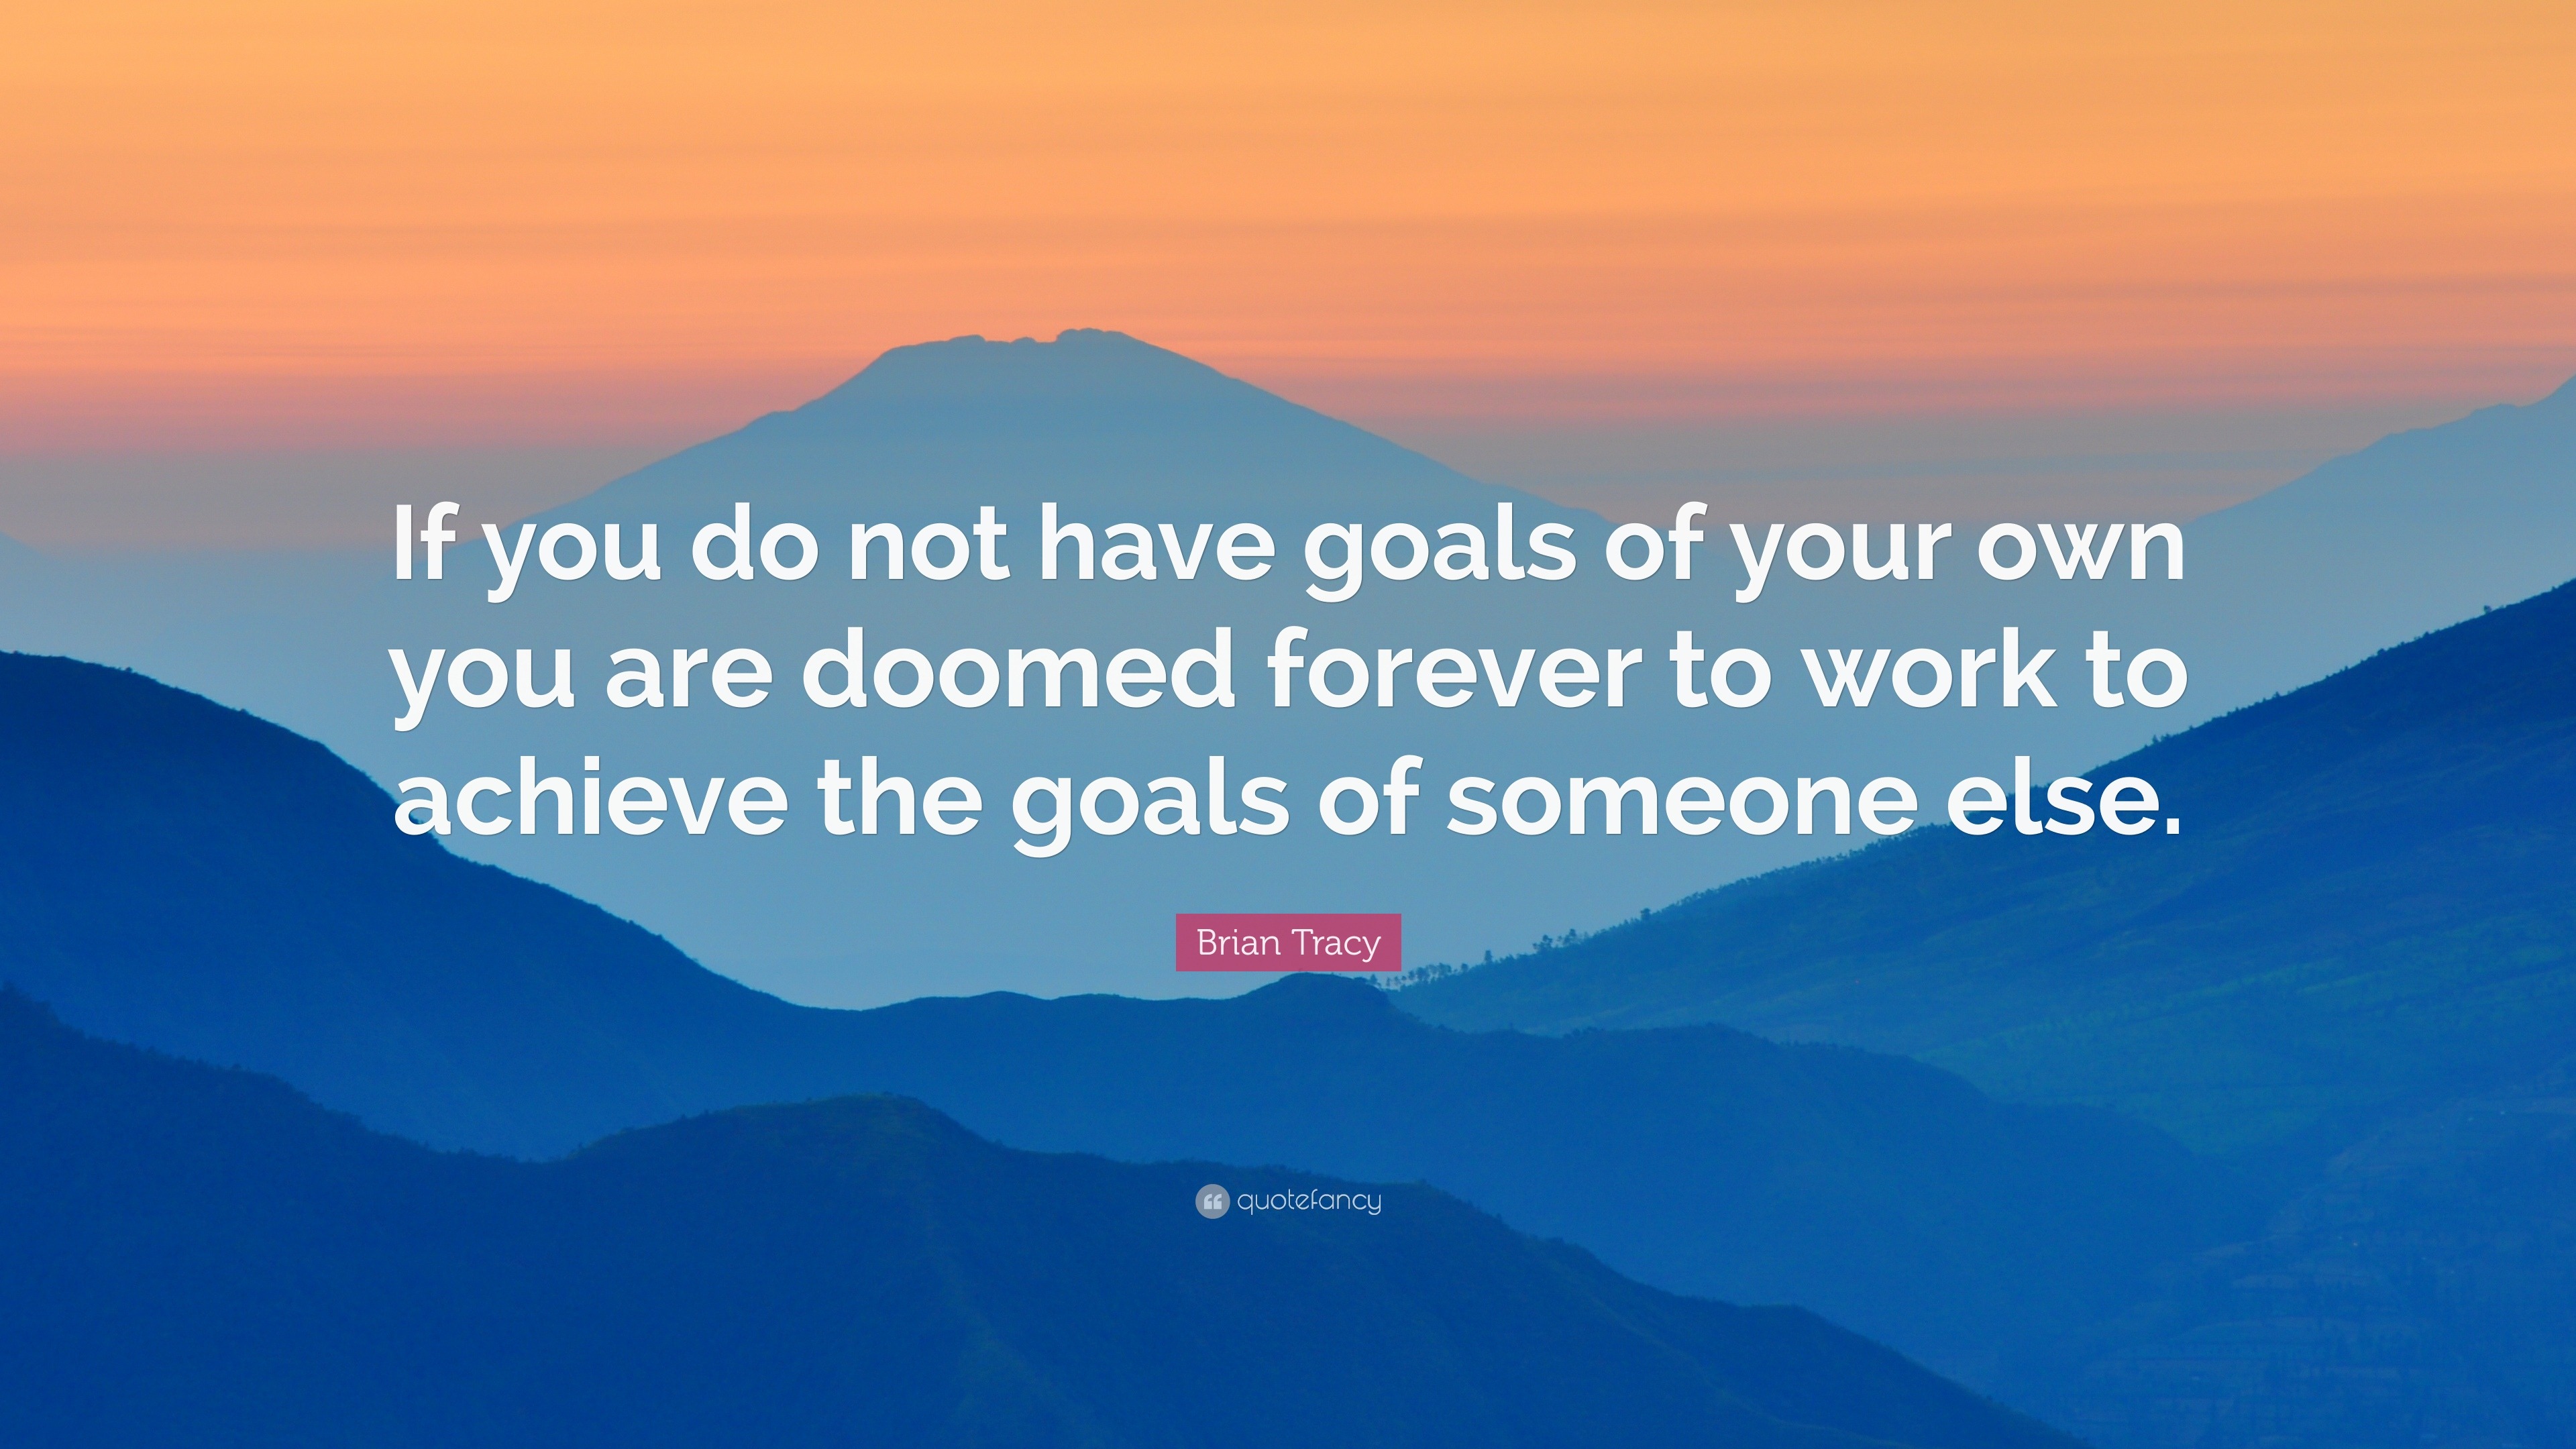 Brian Tracy Quote: “If you do not have goals of your own you are doomed ...